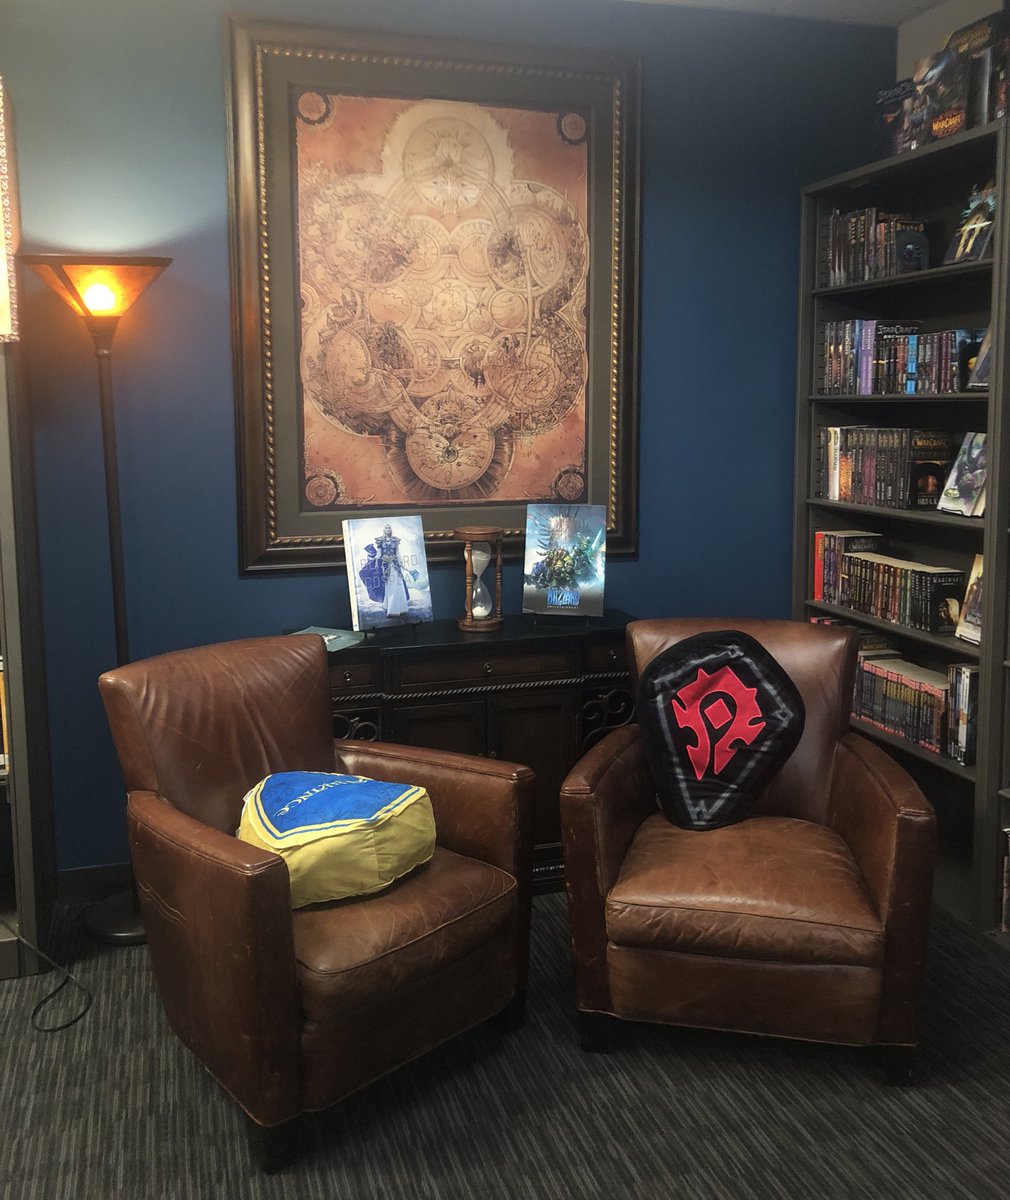 Made my allegiance clear in the HQ library. 

#ForTheHorde #Warcraft